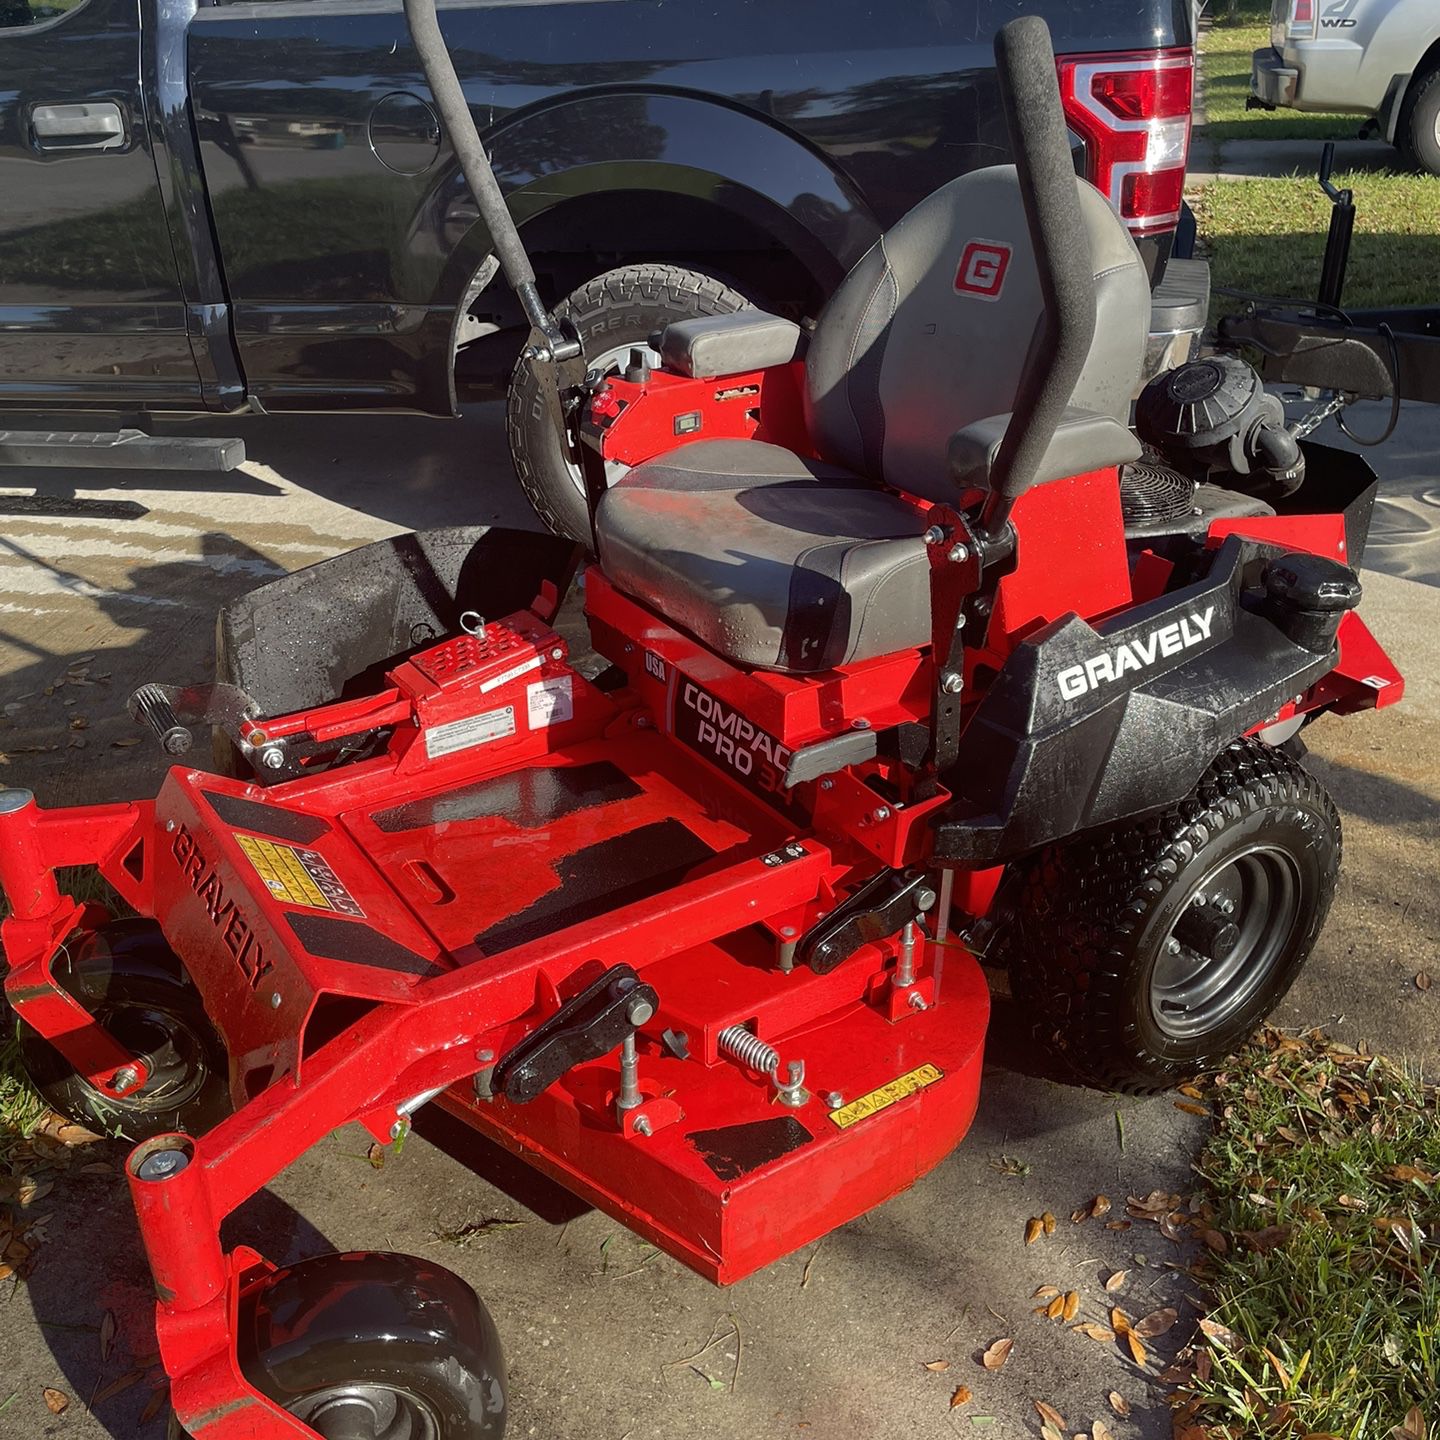 34 Inch Gravely Compact Pro Zero Turn Lawnmower For Sale 6,000